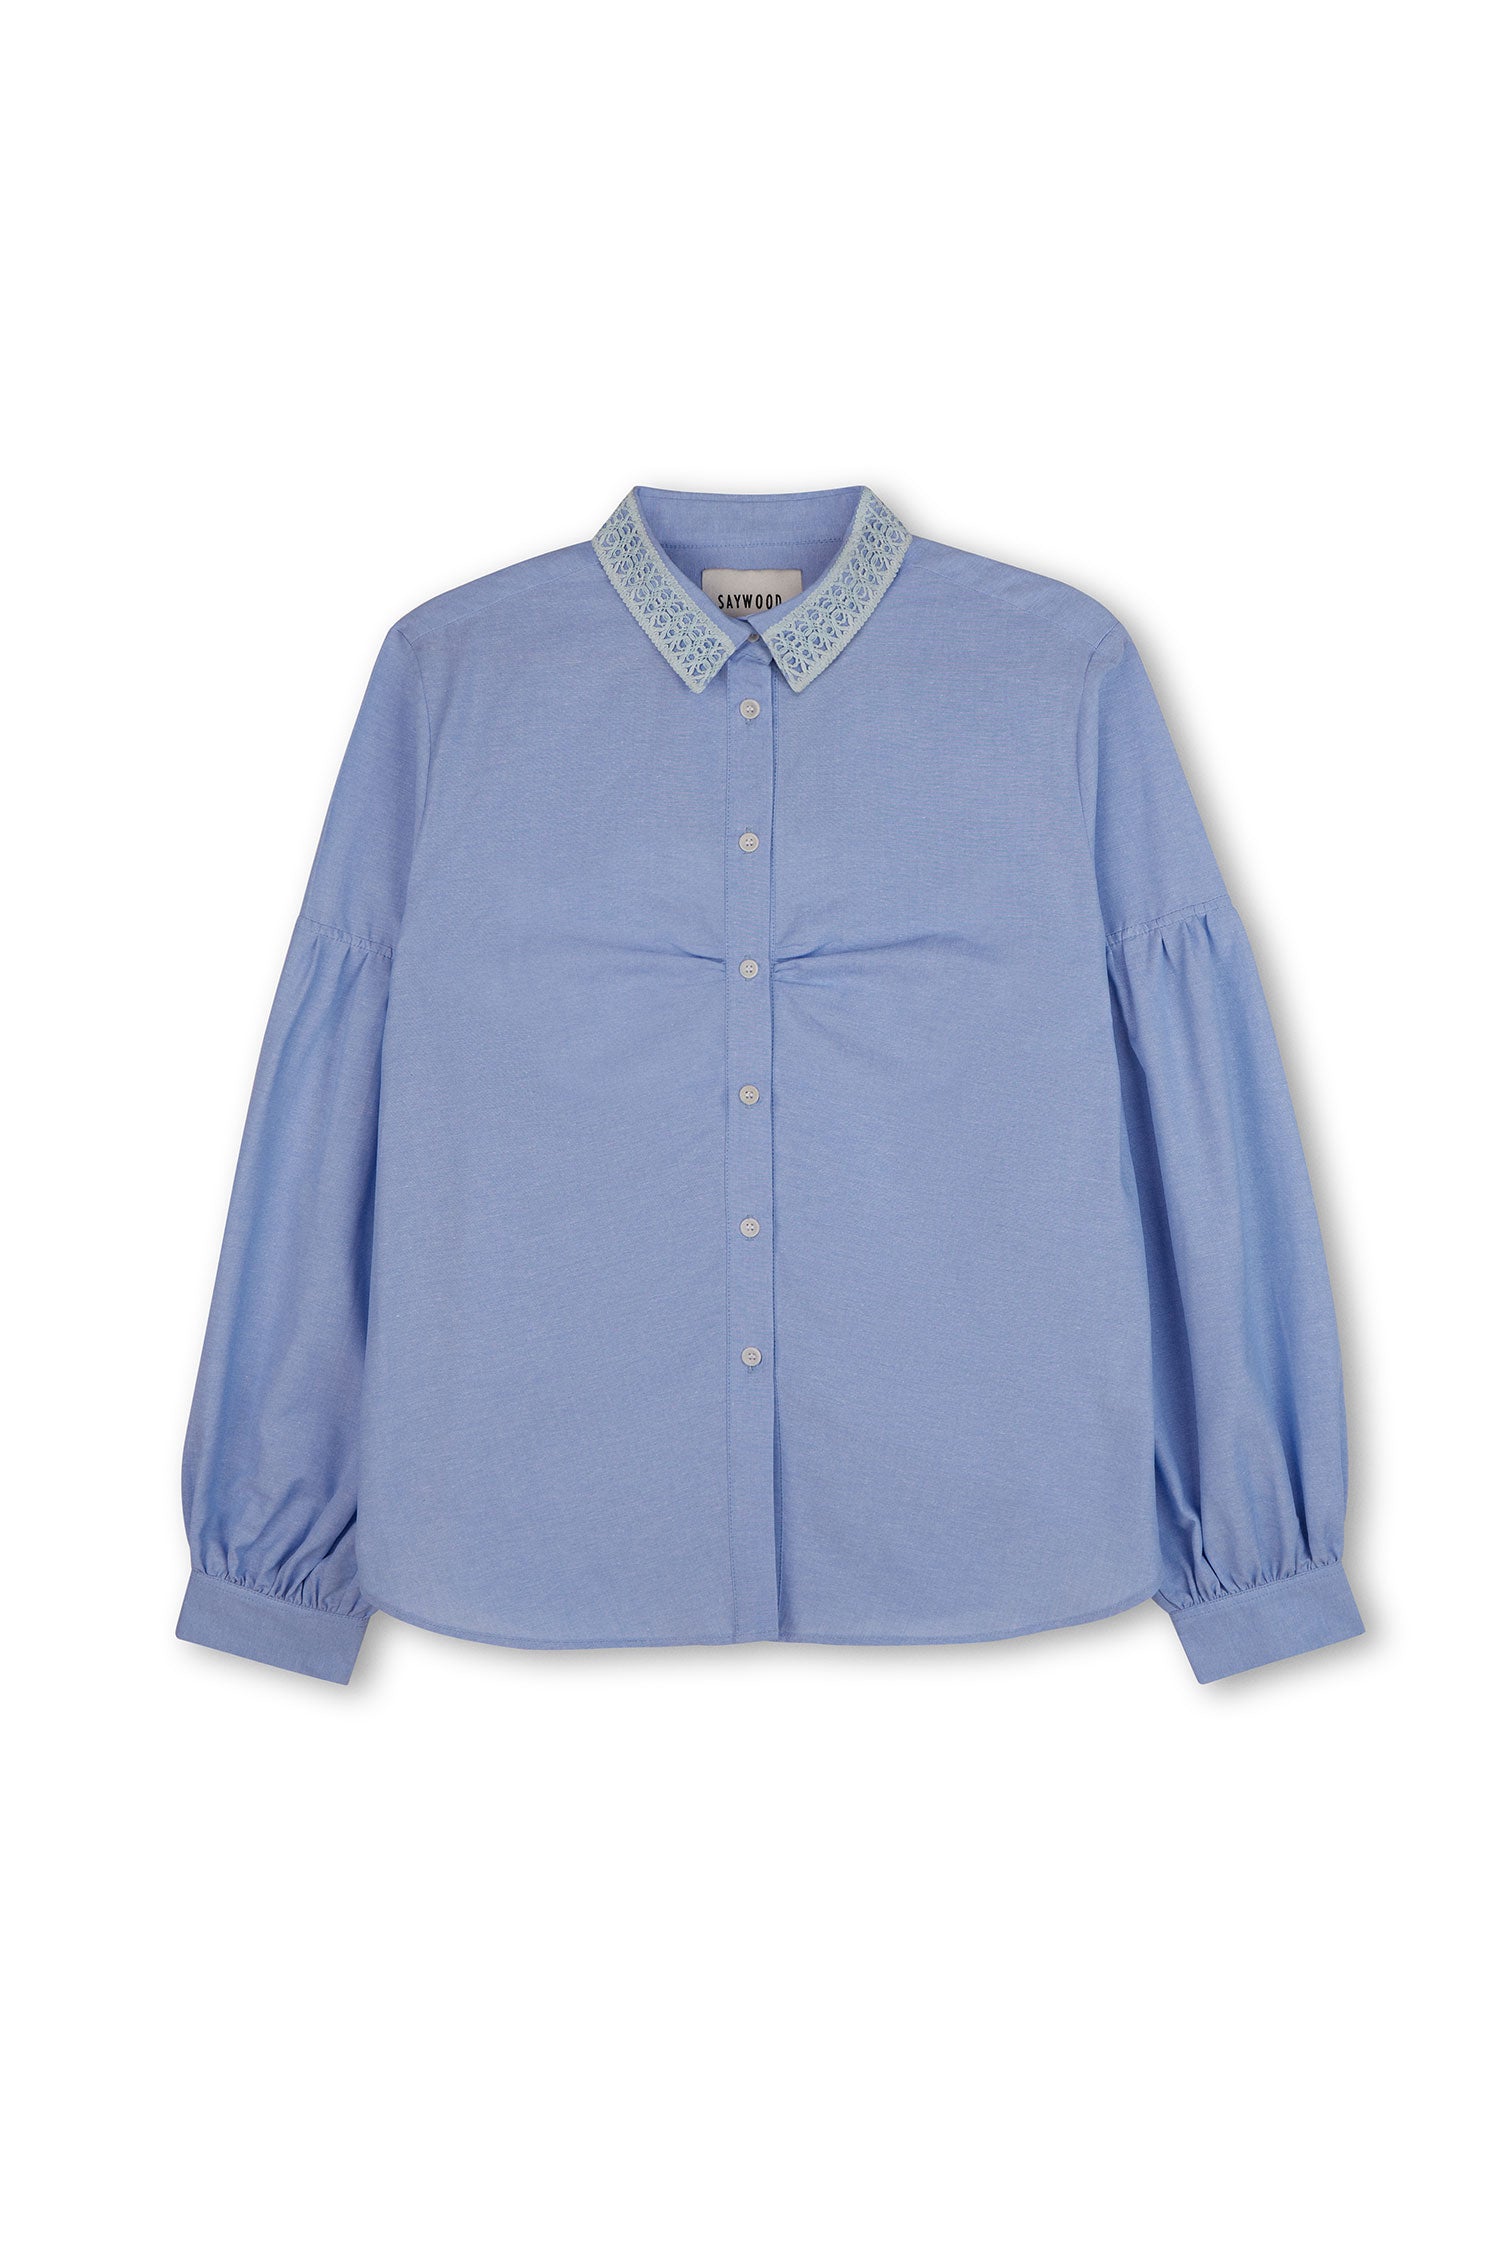 Womens pale blue shirt with lace trim collar and volume sleeves. Soft gathering is at the bust, with shirt made in recycled cotton. Shirt is on a white background